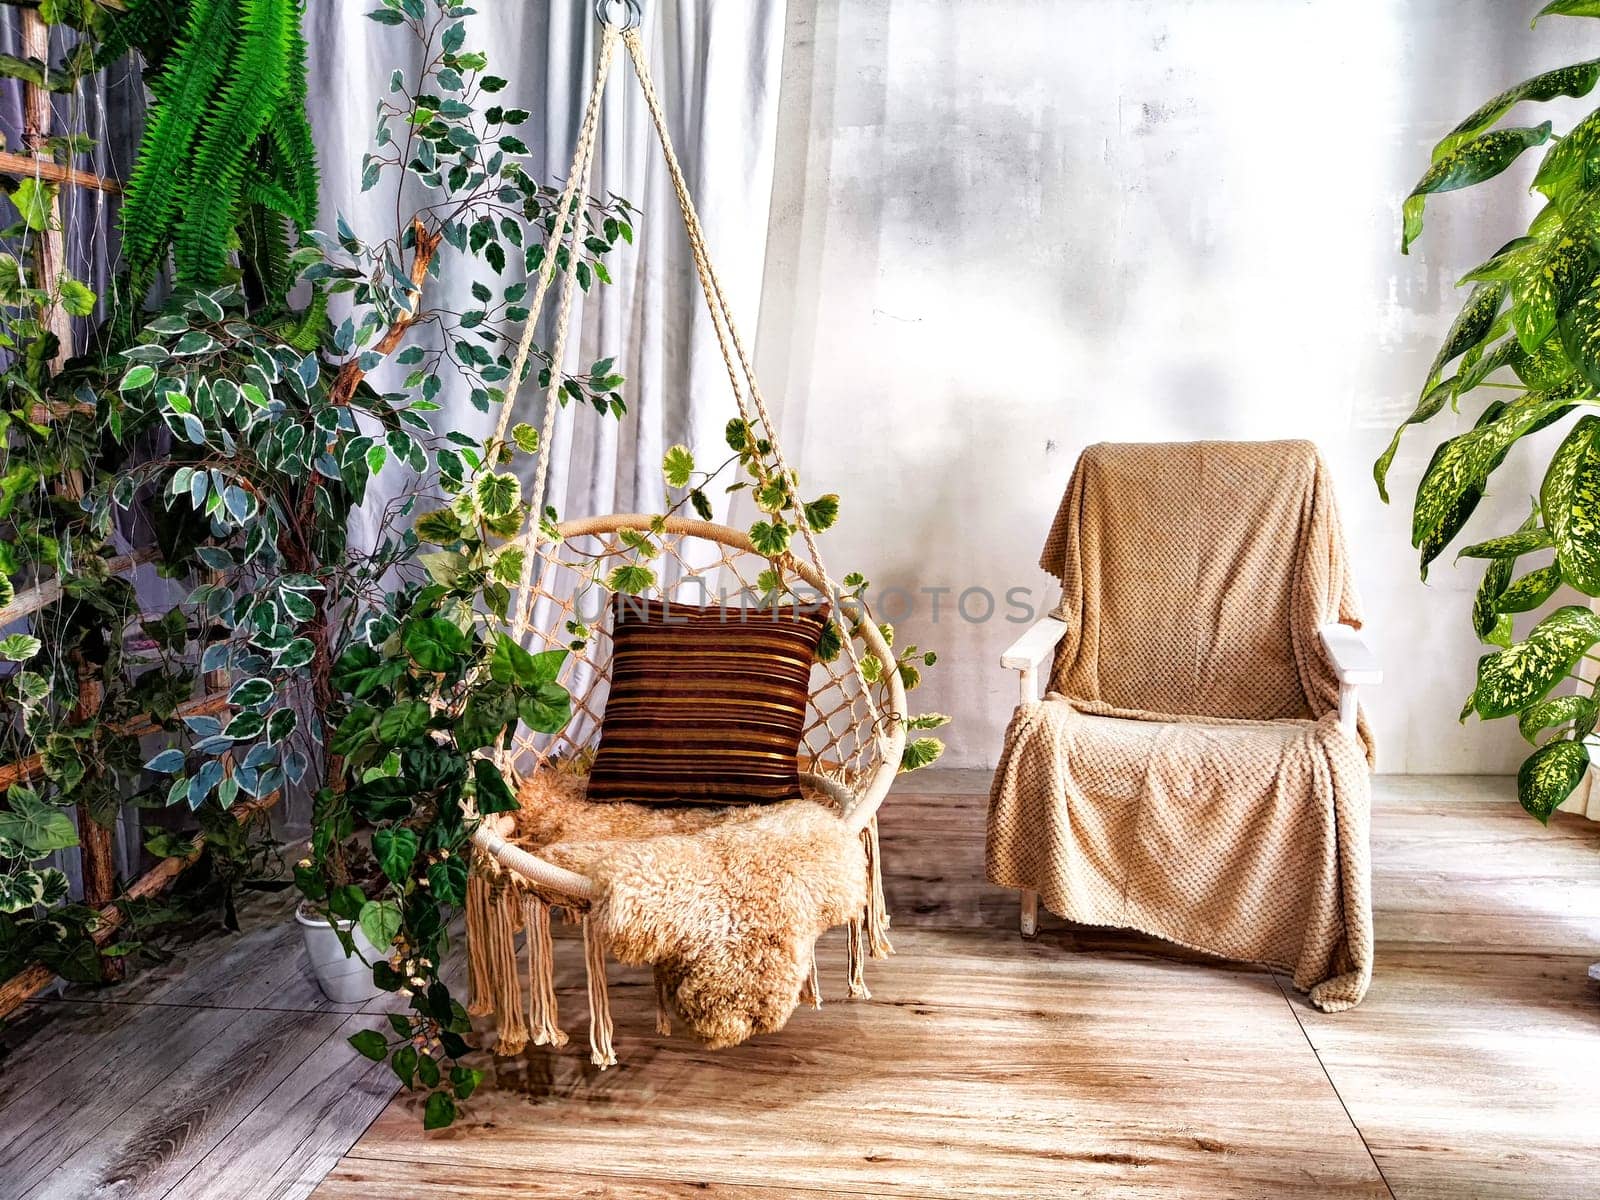 Mdern cozy beautiful room with braided rope macrame chair, green plants and window with curtains. Interior and background. Location for photo shooting by keleny